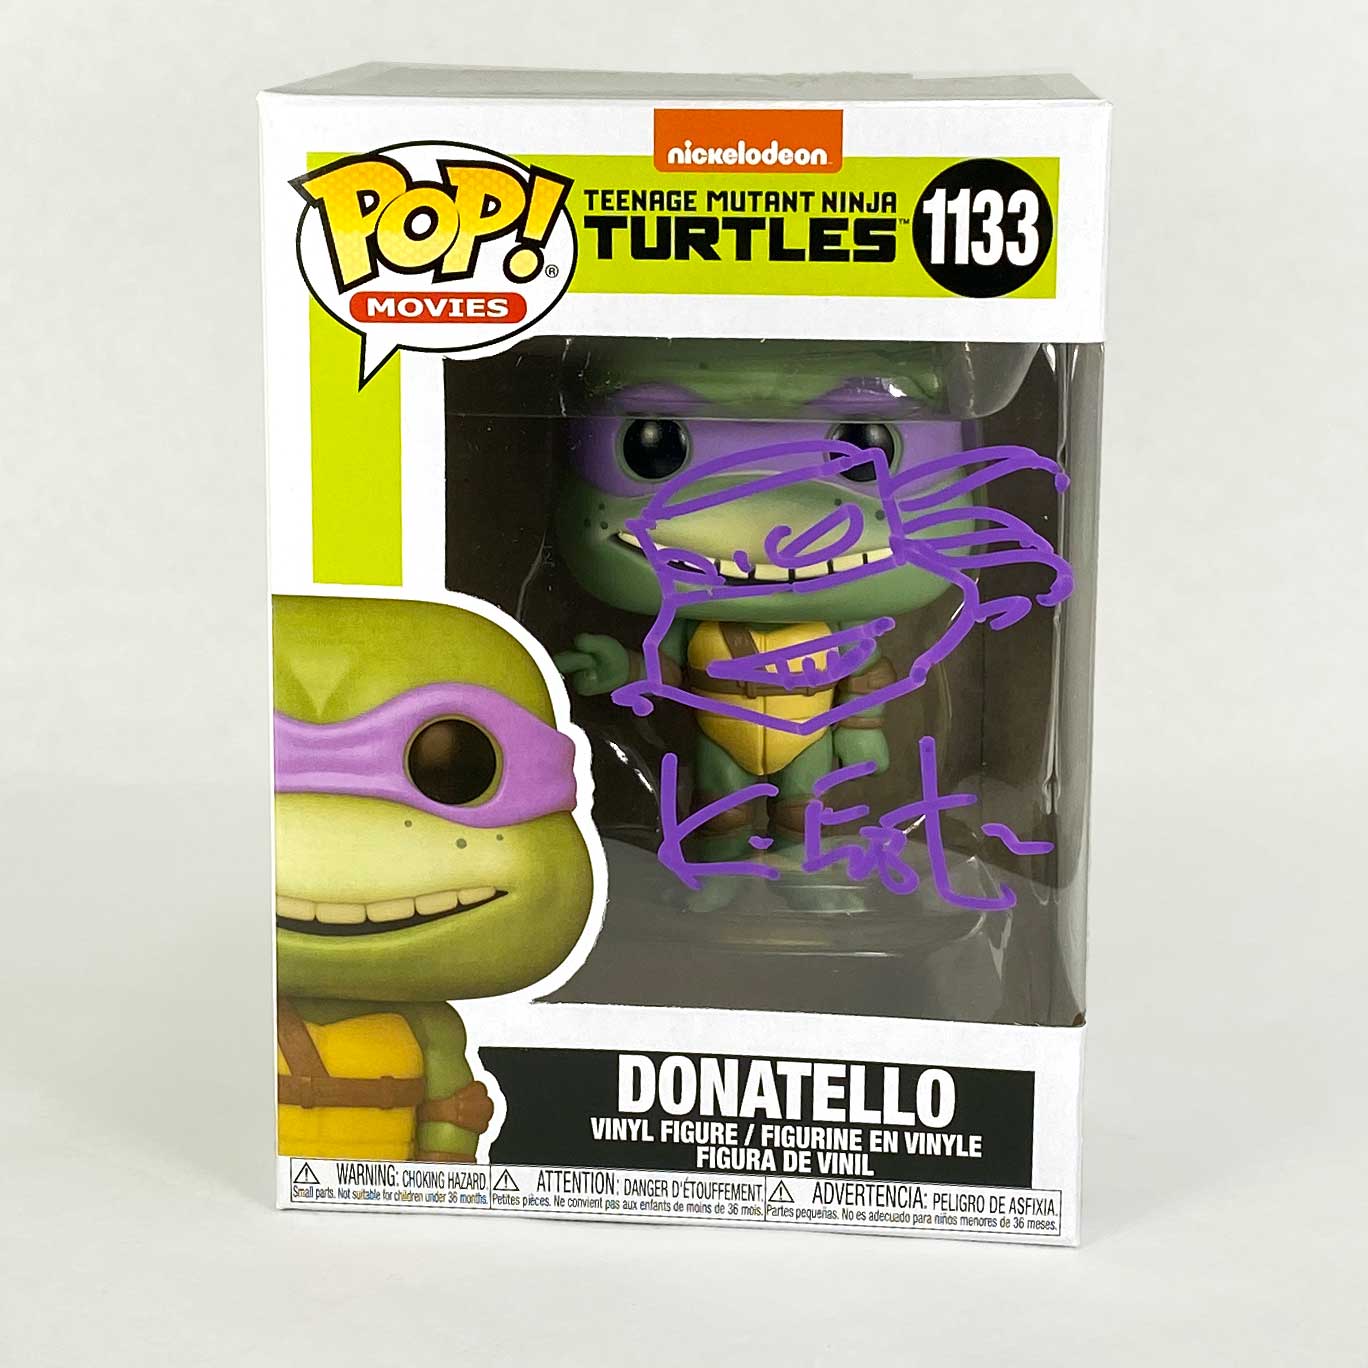 Slightly Damaged, Funko Pop TMNT Exclusive Donatello #1133 – Signed with Head Sketch